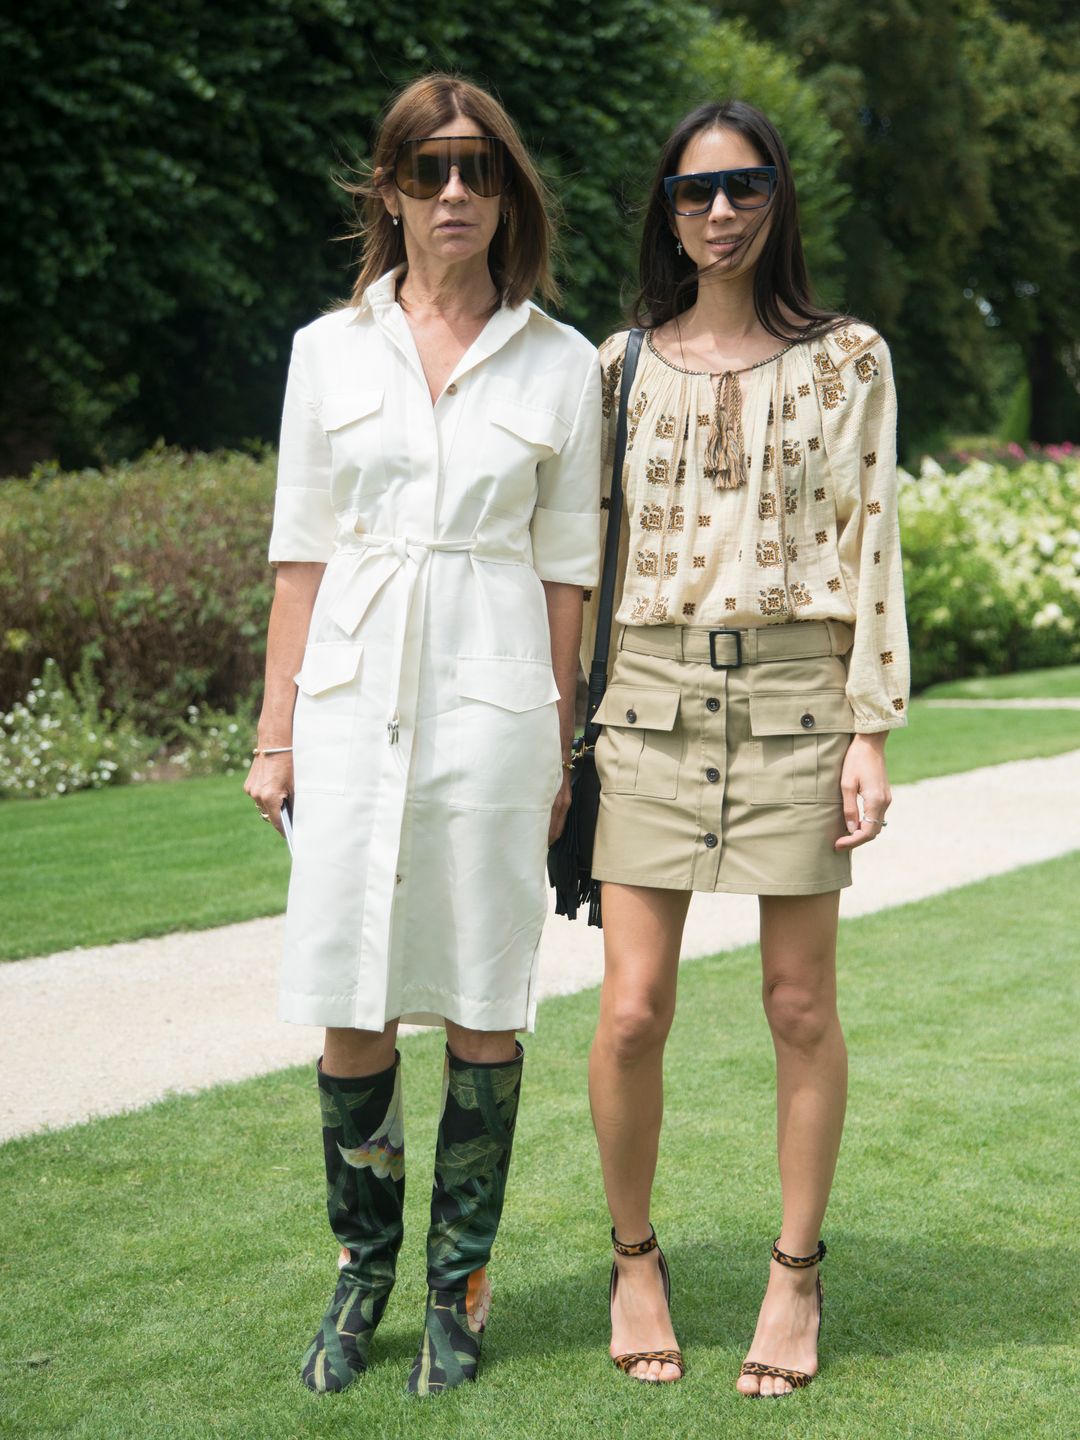 Melanie photographed with Carine Roitfeld during Paris Haute Couture Fashion Week, 2014.